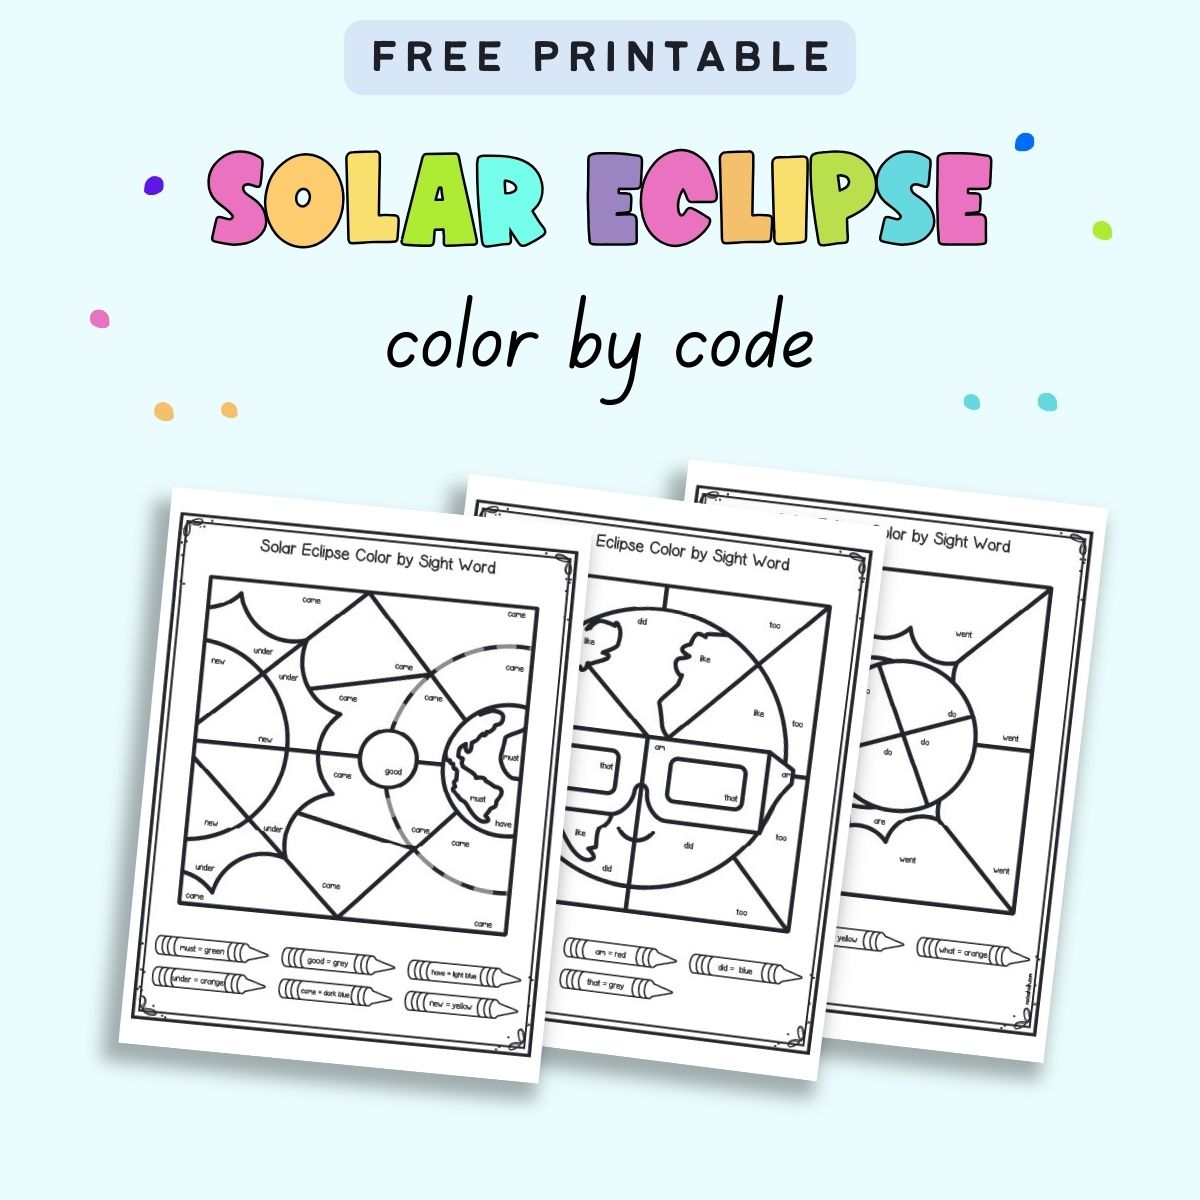 Text "Free printable solar eclipse color by code" with a preview of three sheets of color by sight word pages for kindergarten